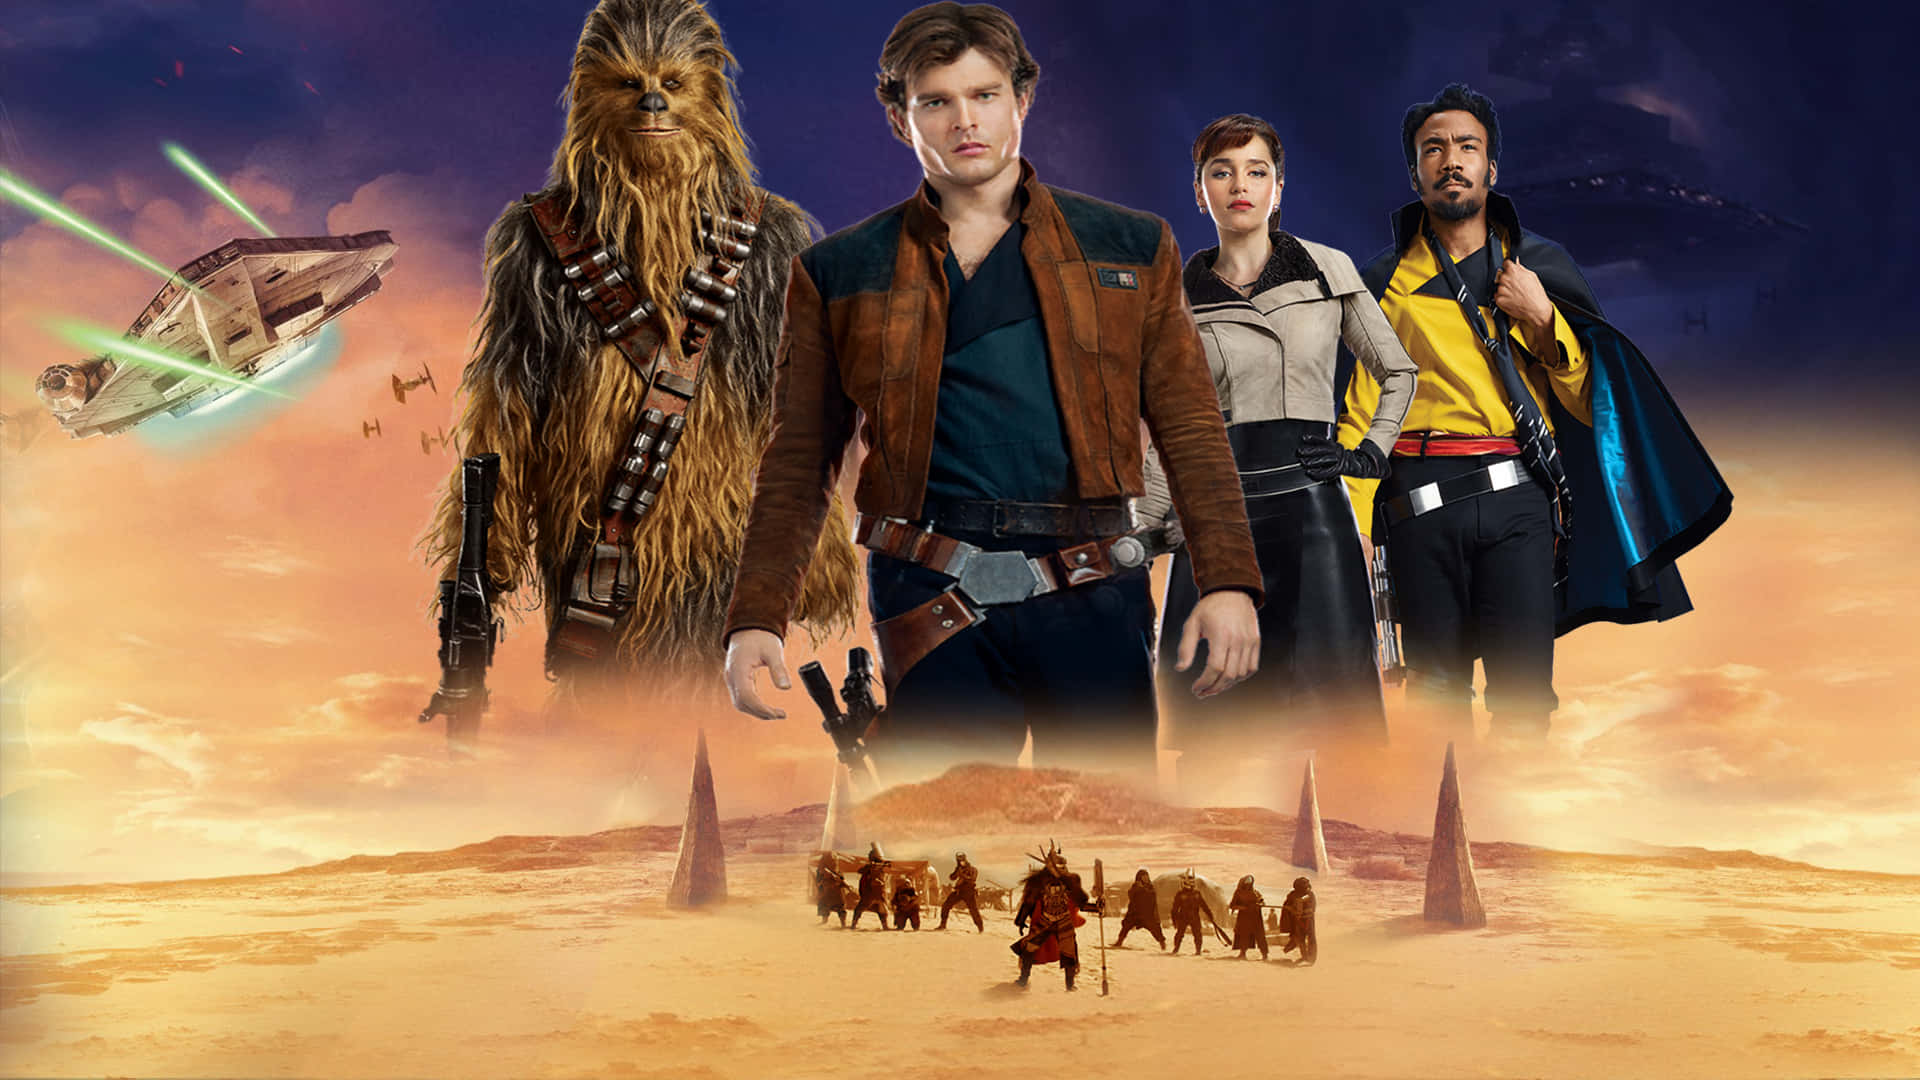 Exciting Adventure in Solo: A Star Wars Story Wallpaper